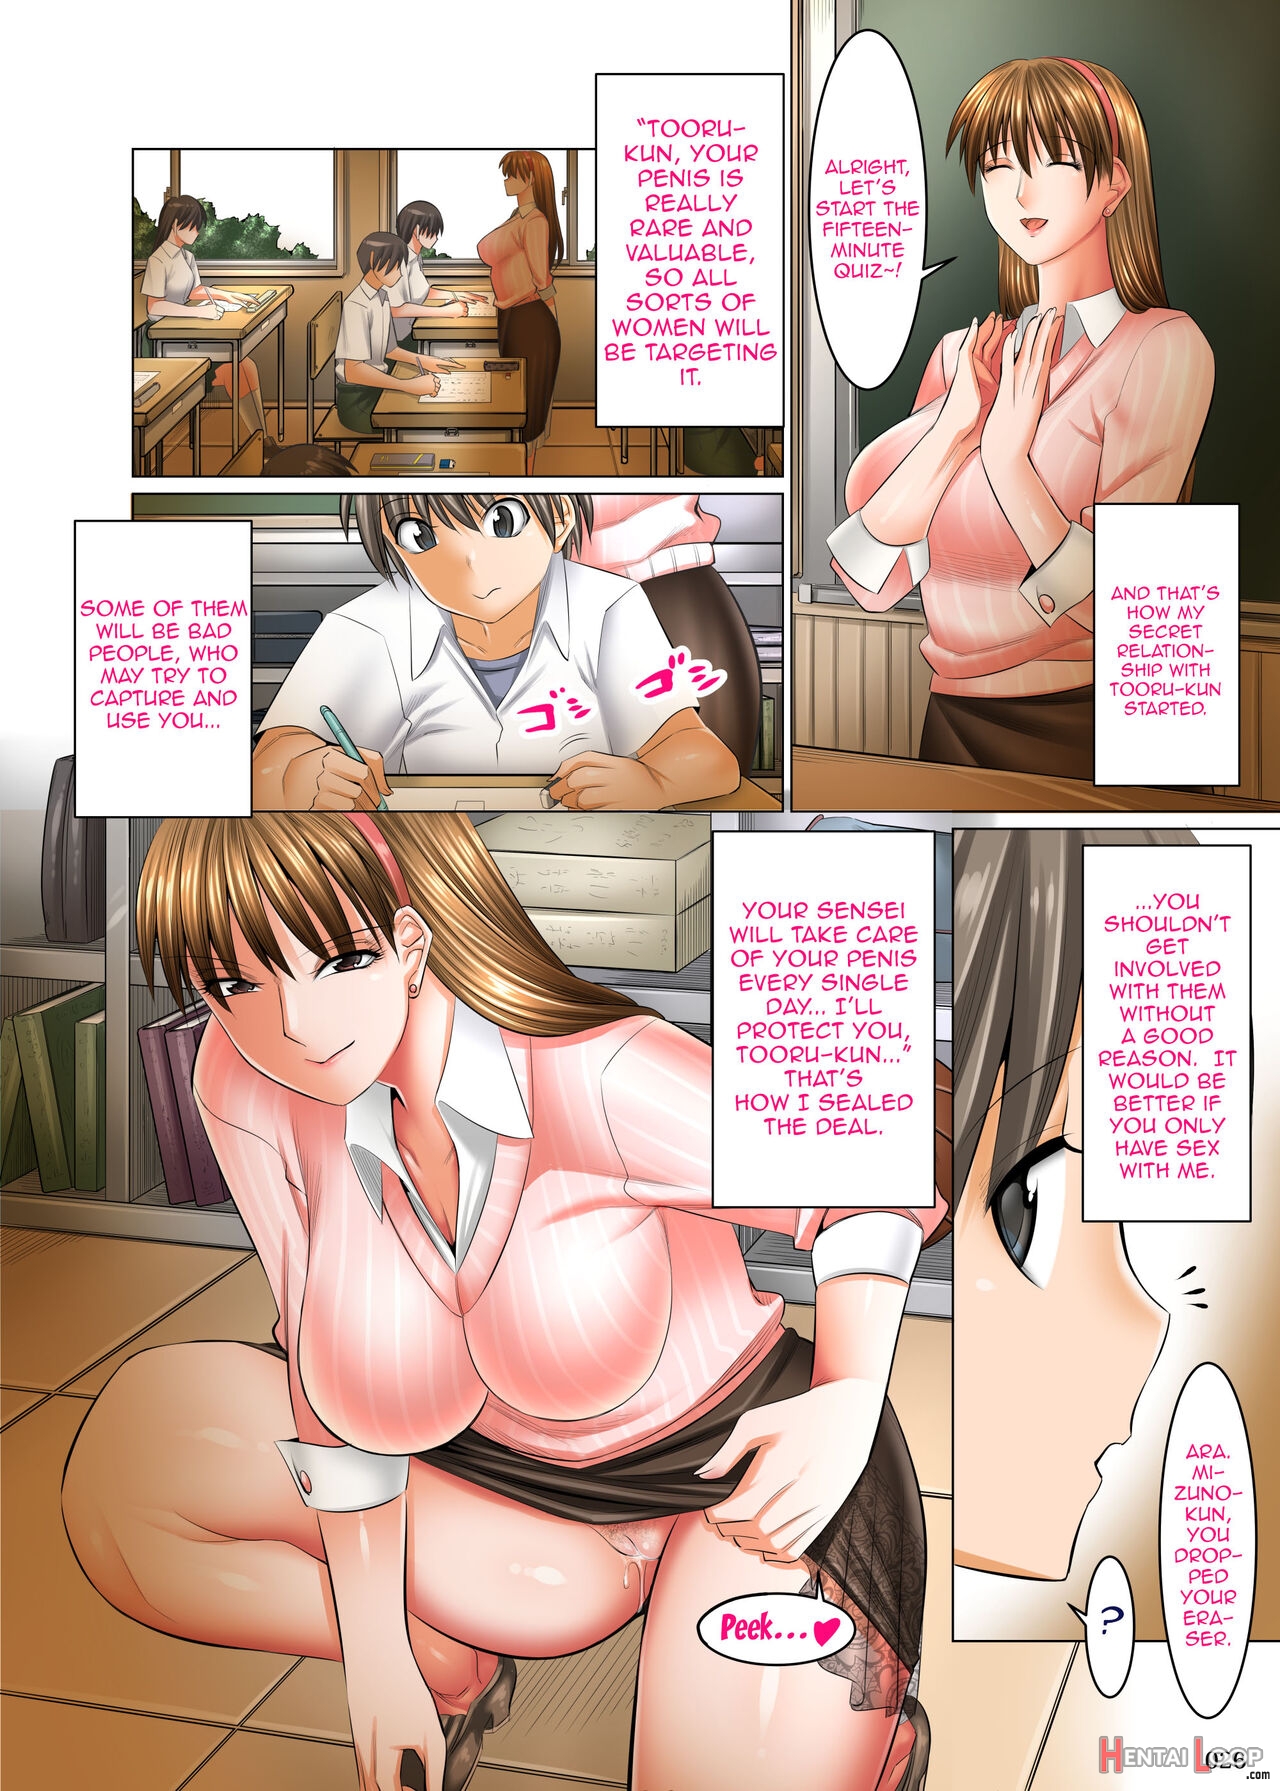 A World Where All Men But Me Are Impotent - Homeroom Teacher Edition page 25